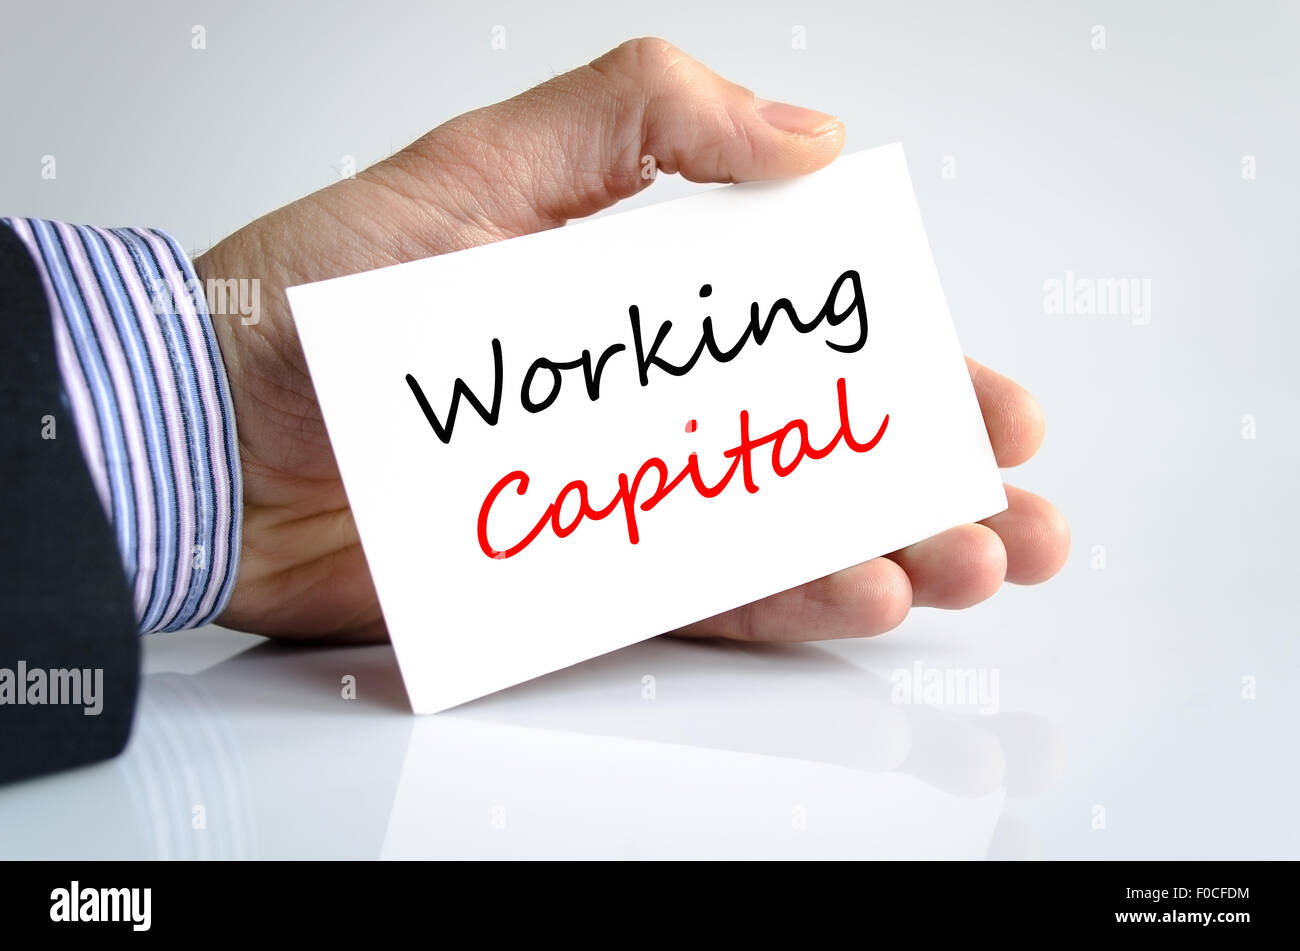 Working capital text concept isolated over white background Stock Photo